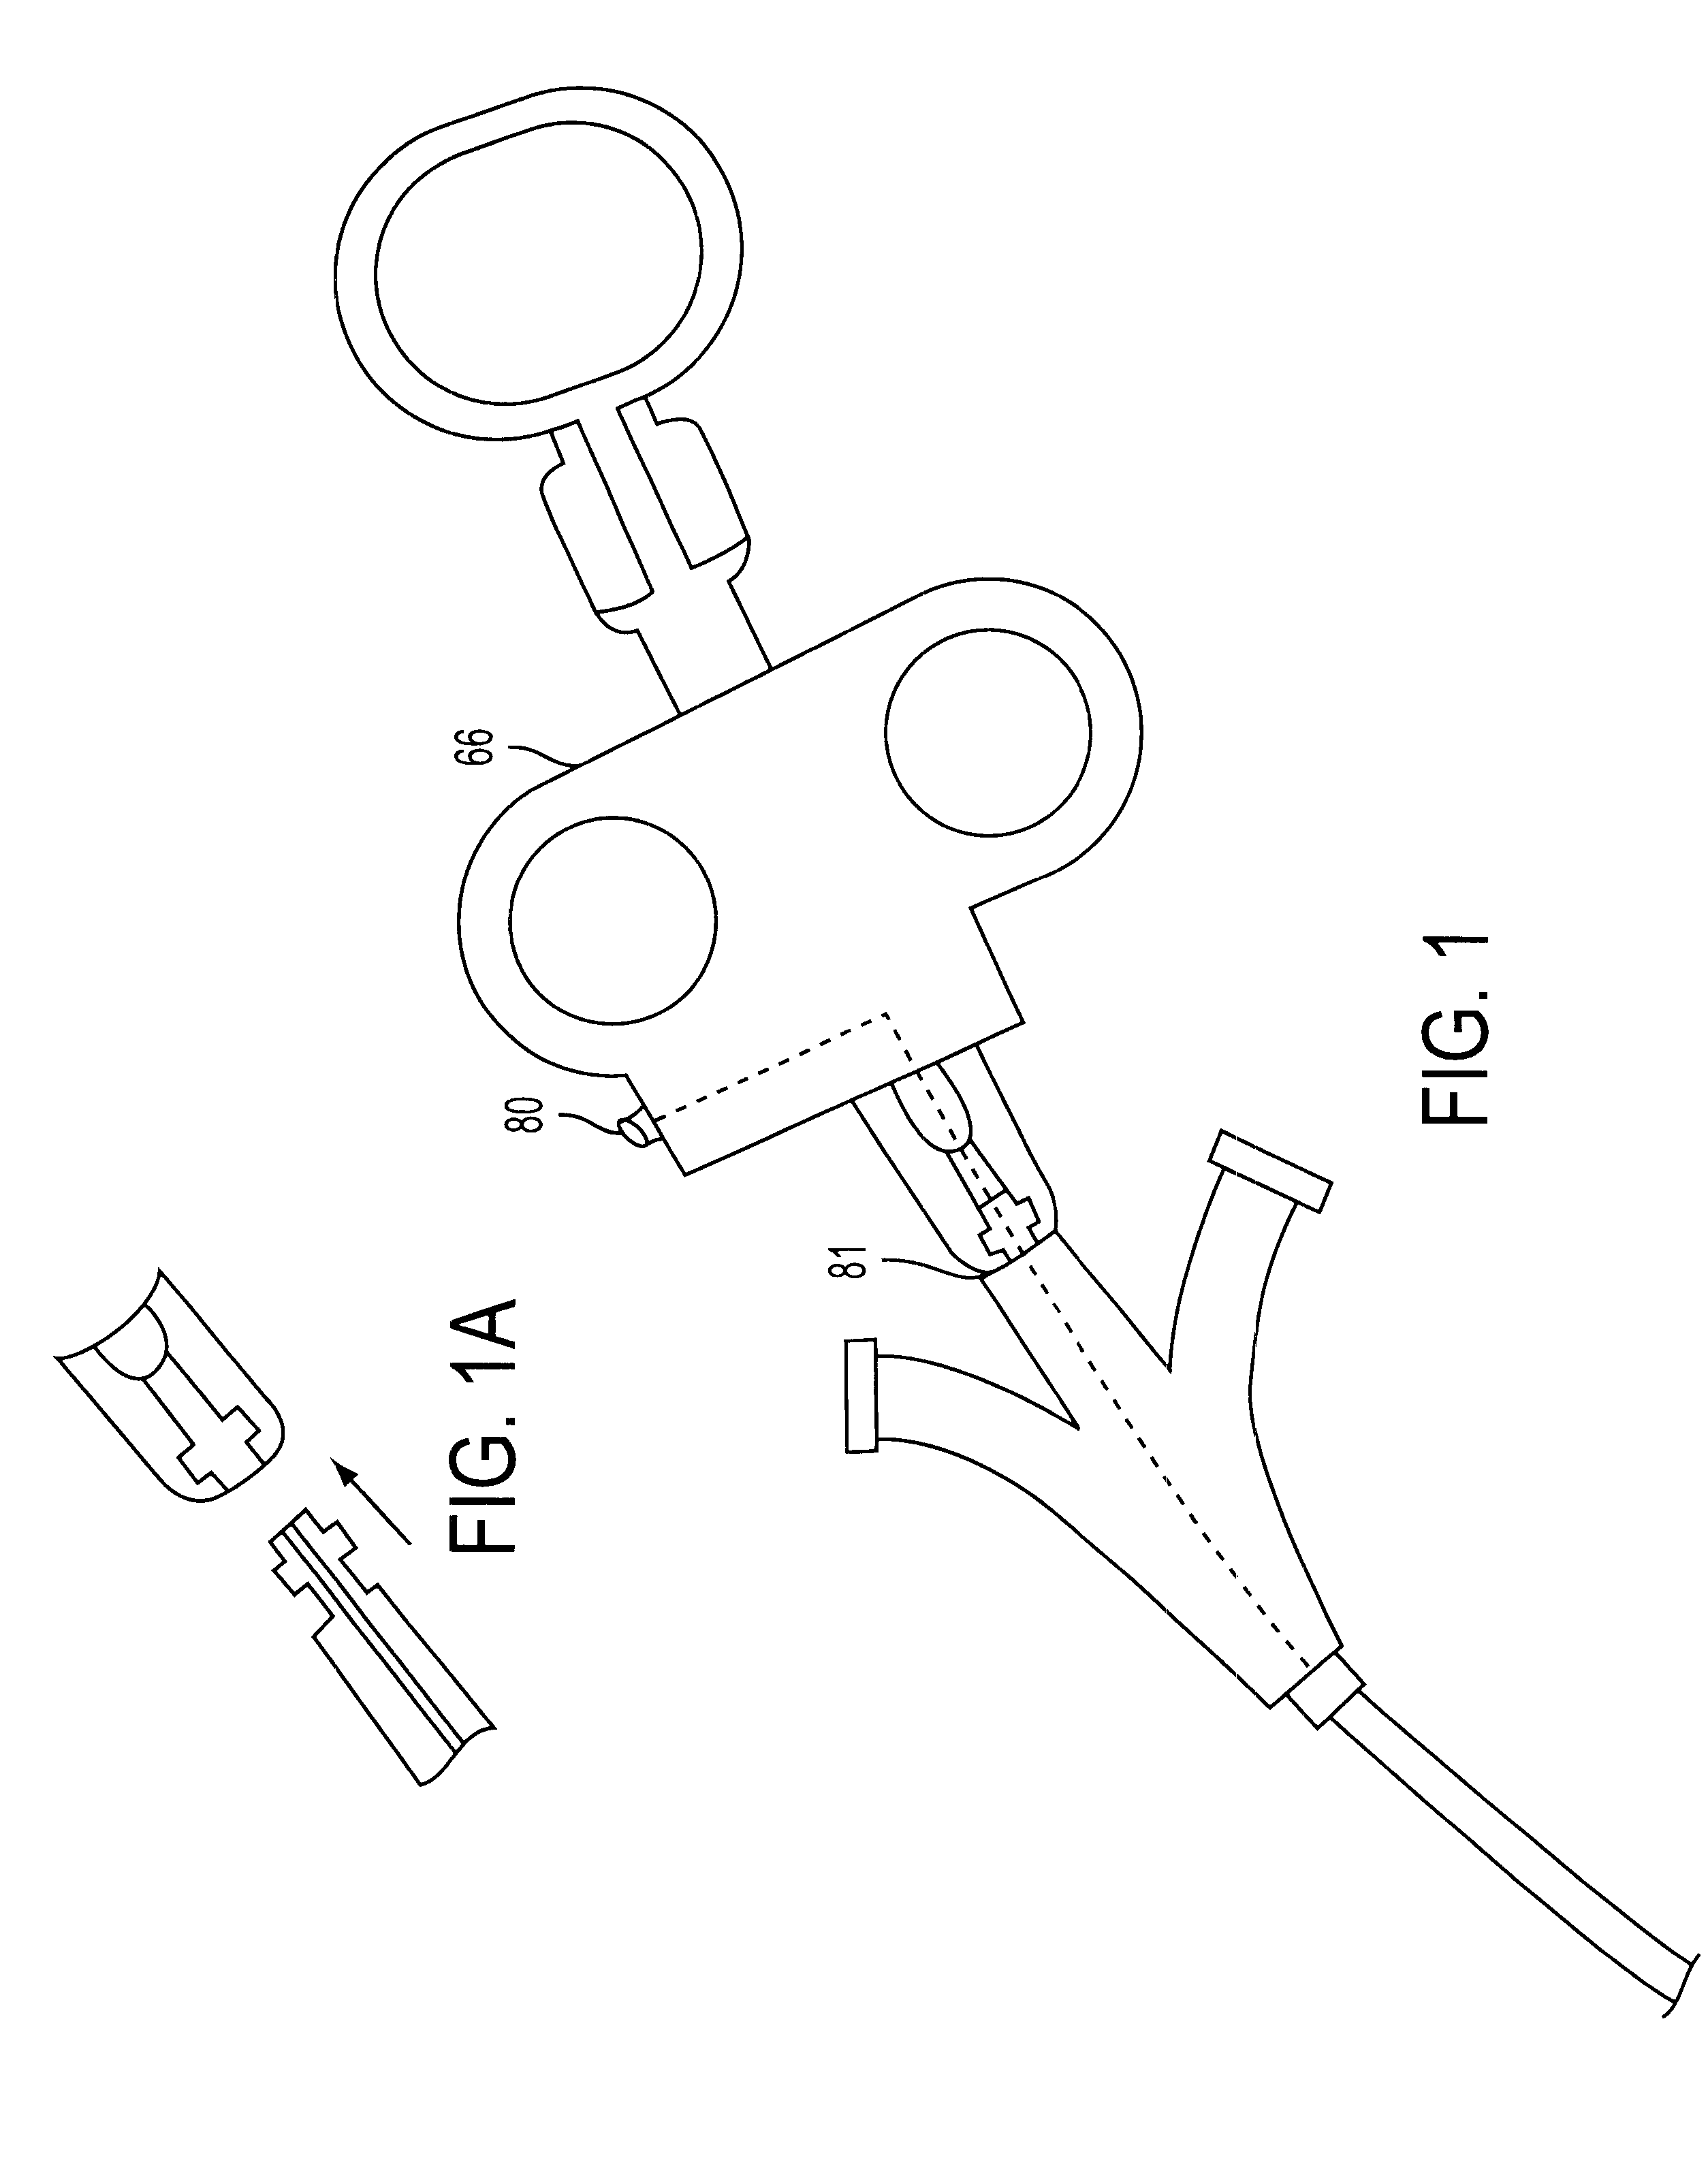 Steerable sphincterotome and methods for cannulation, papillotomy and sphincterotomy